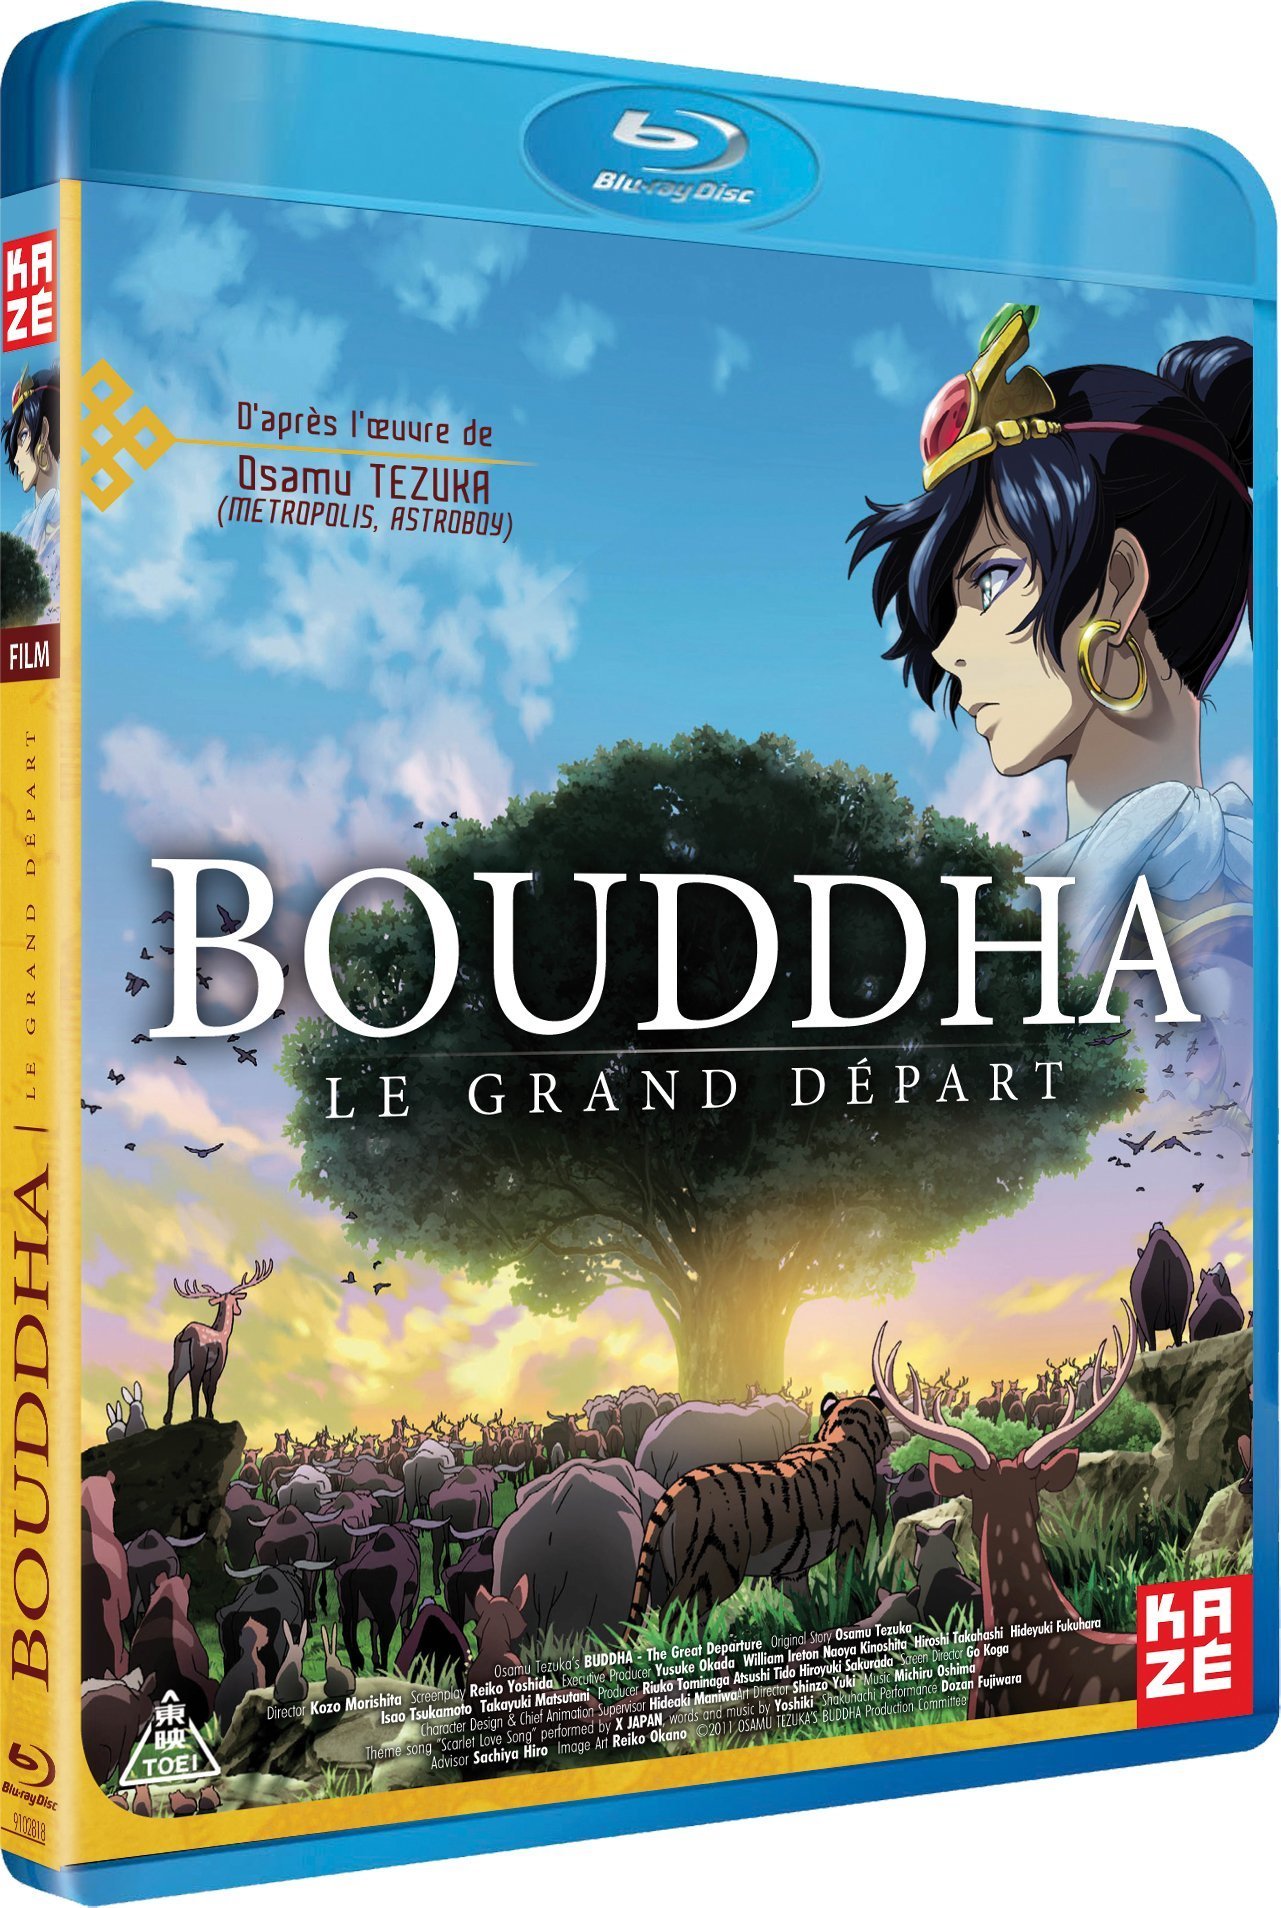 Buddha: The Great Departure (2011) 1080p720p-480p BluRay Hollywood Movie ORG. [Dual Audio] [Hindi or Japanese] x264 ESubs